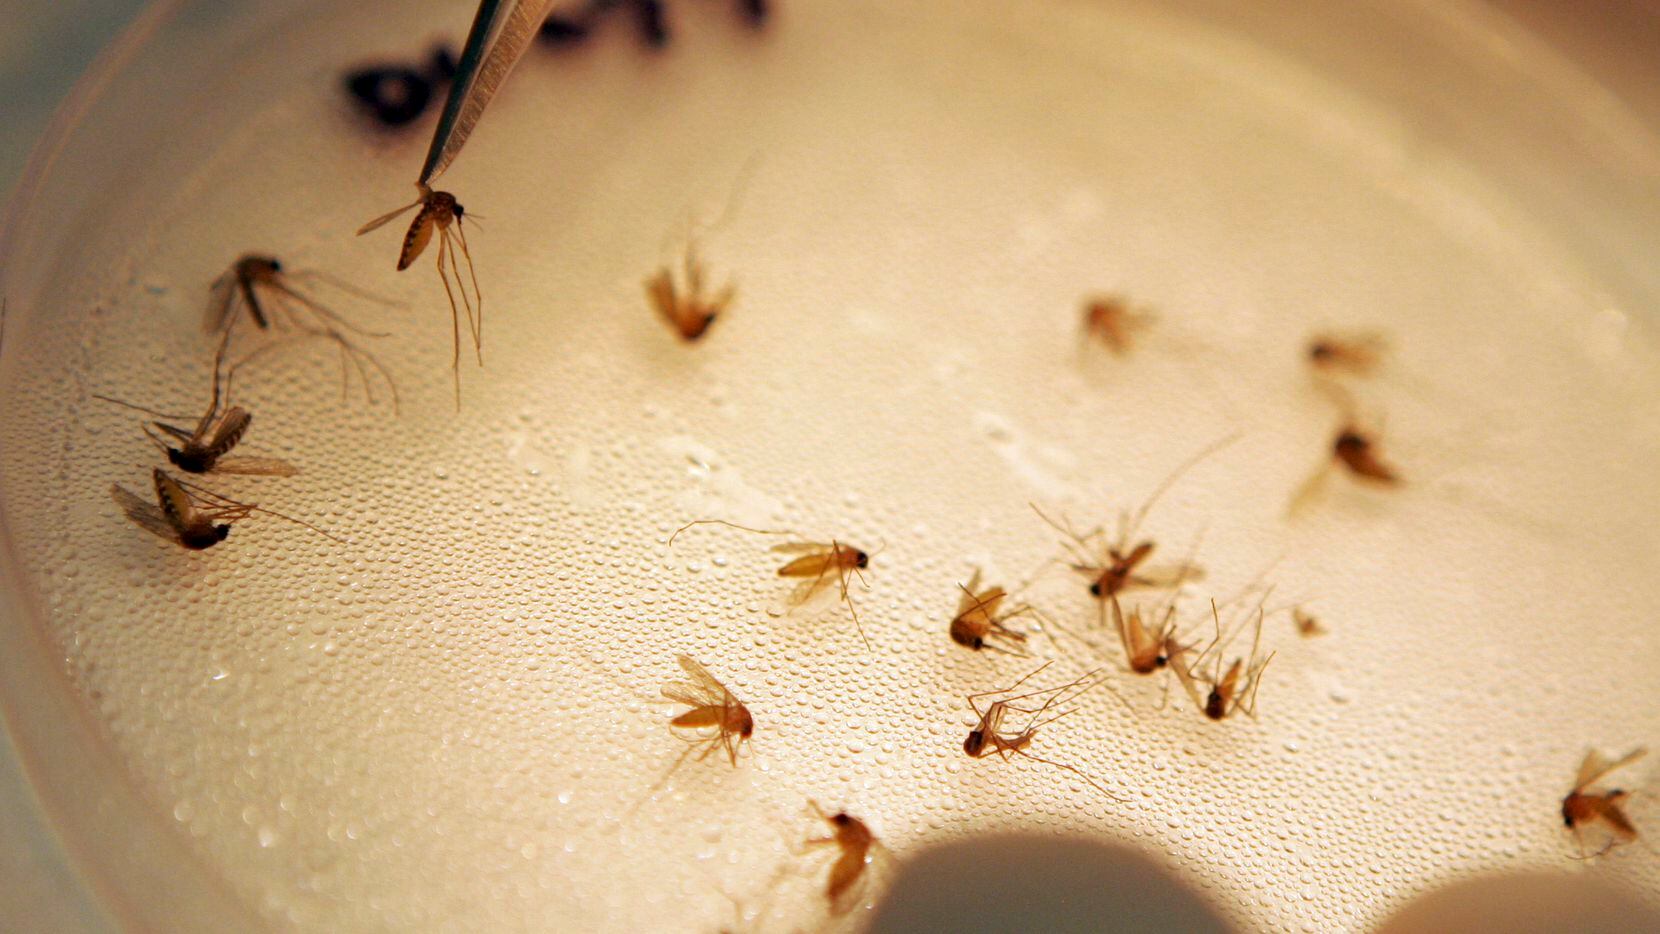 McKinney will spray for mosquitos Thursday after a sample tested positive for West Nile virus.